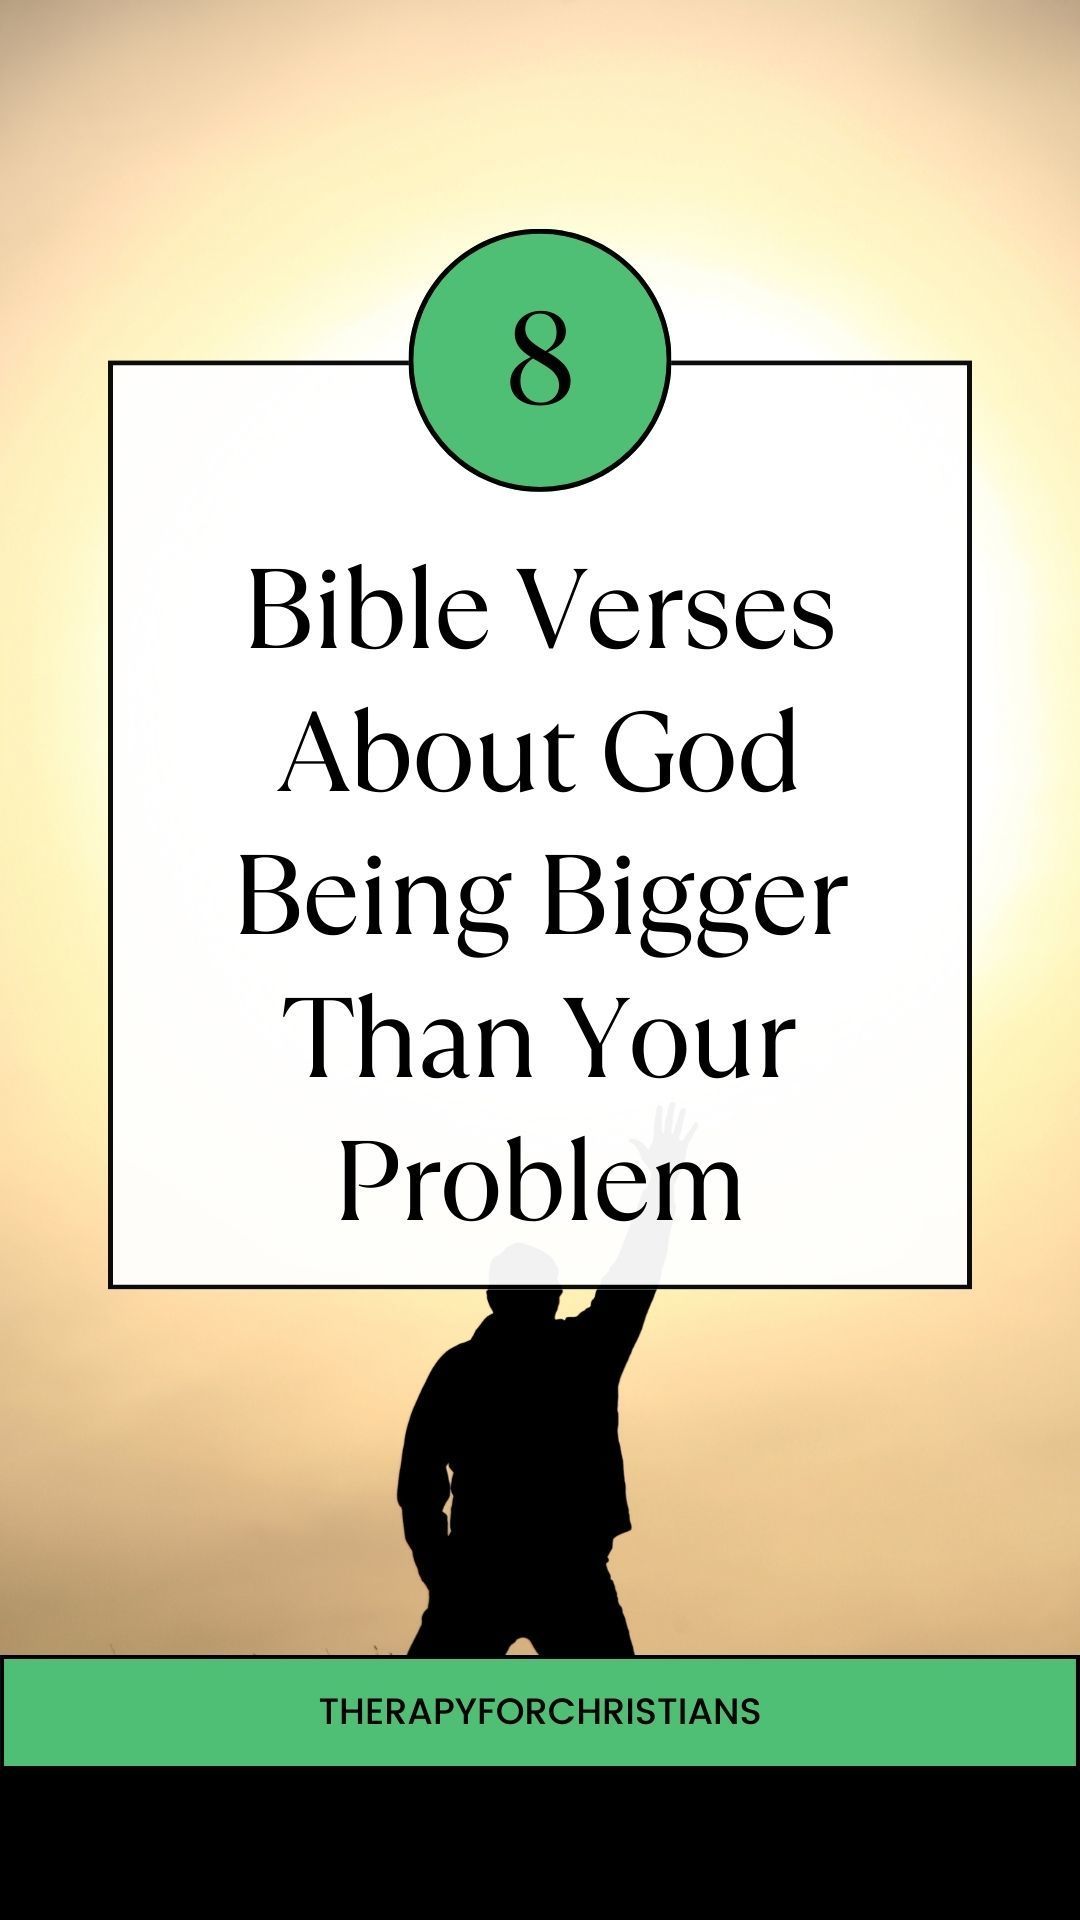 God is Bigger that our Problems pin